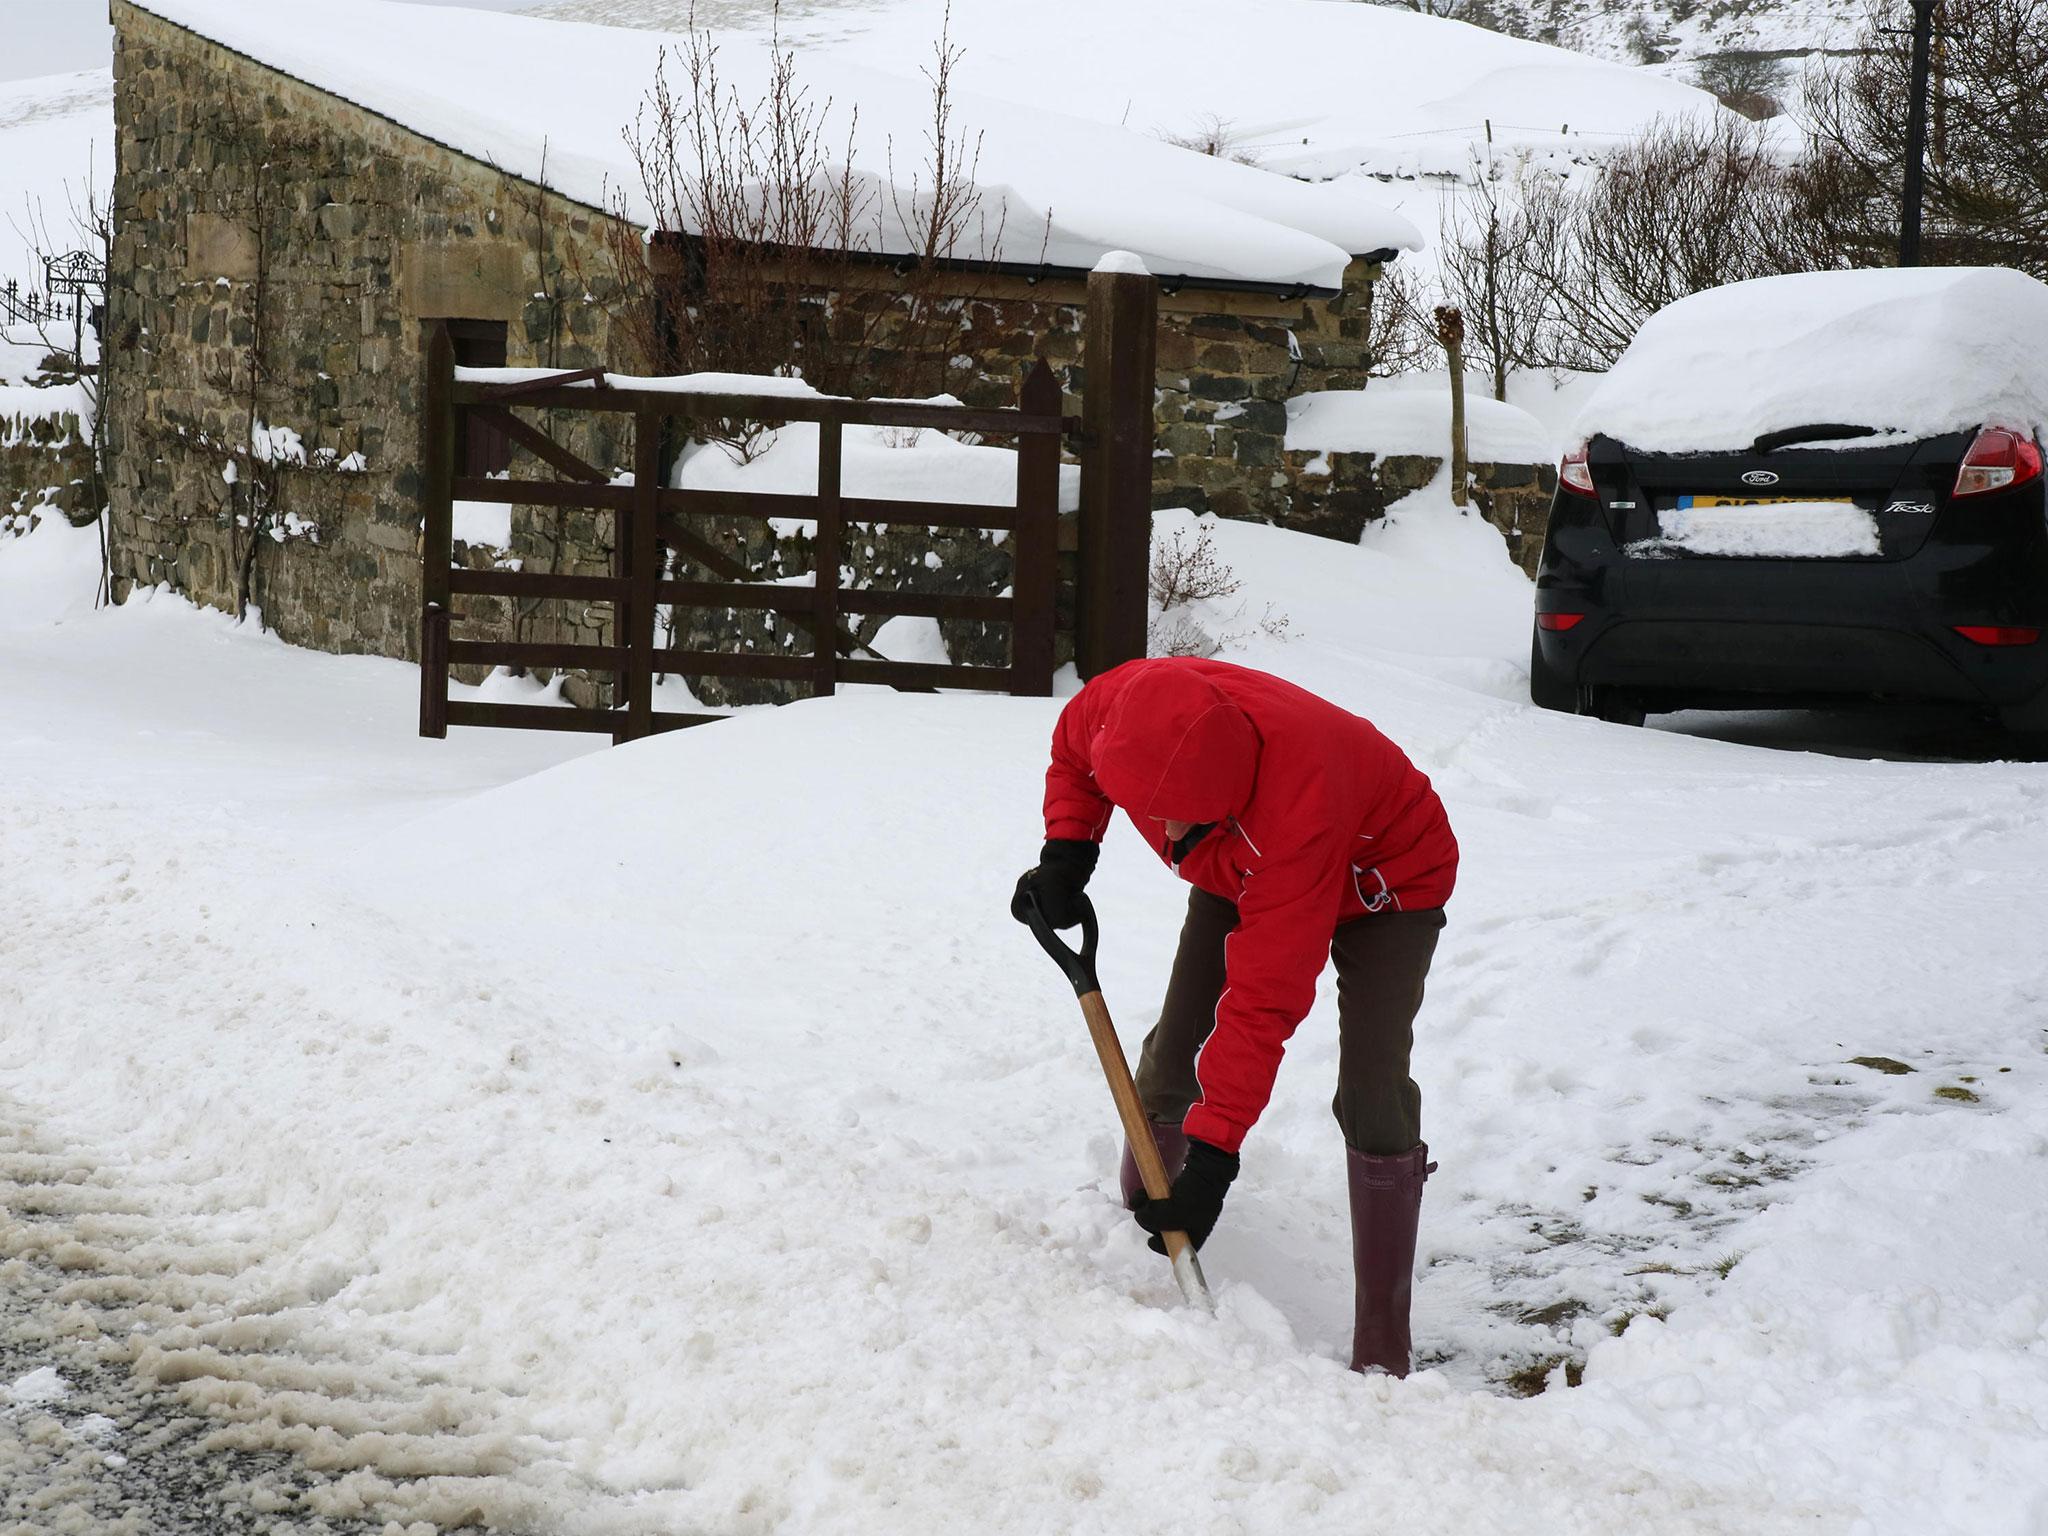 Snow still covers large parts of the UK